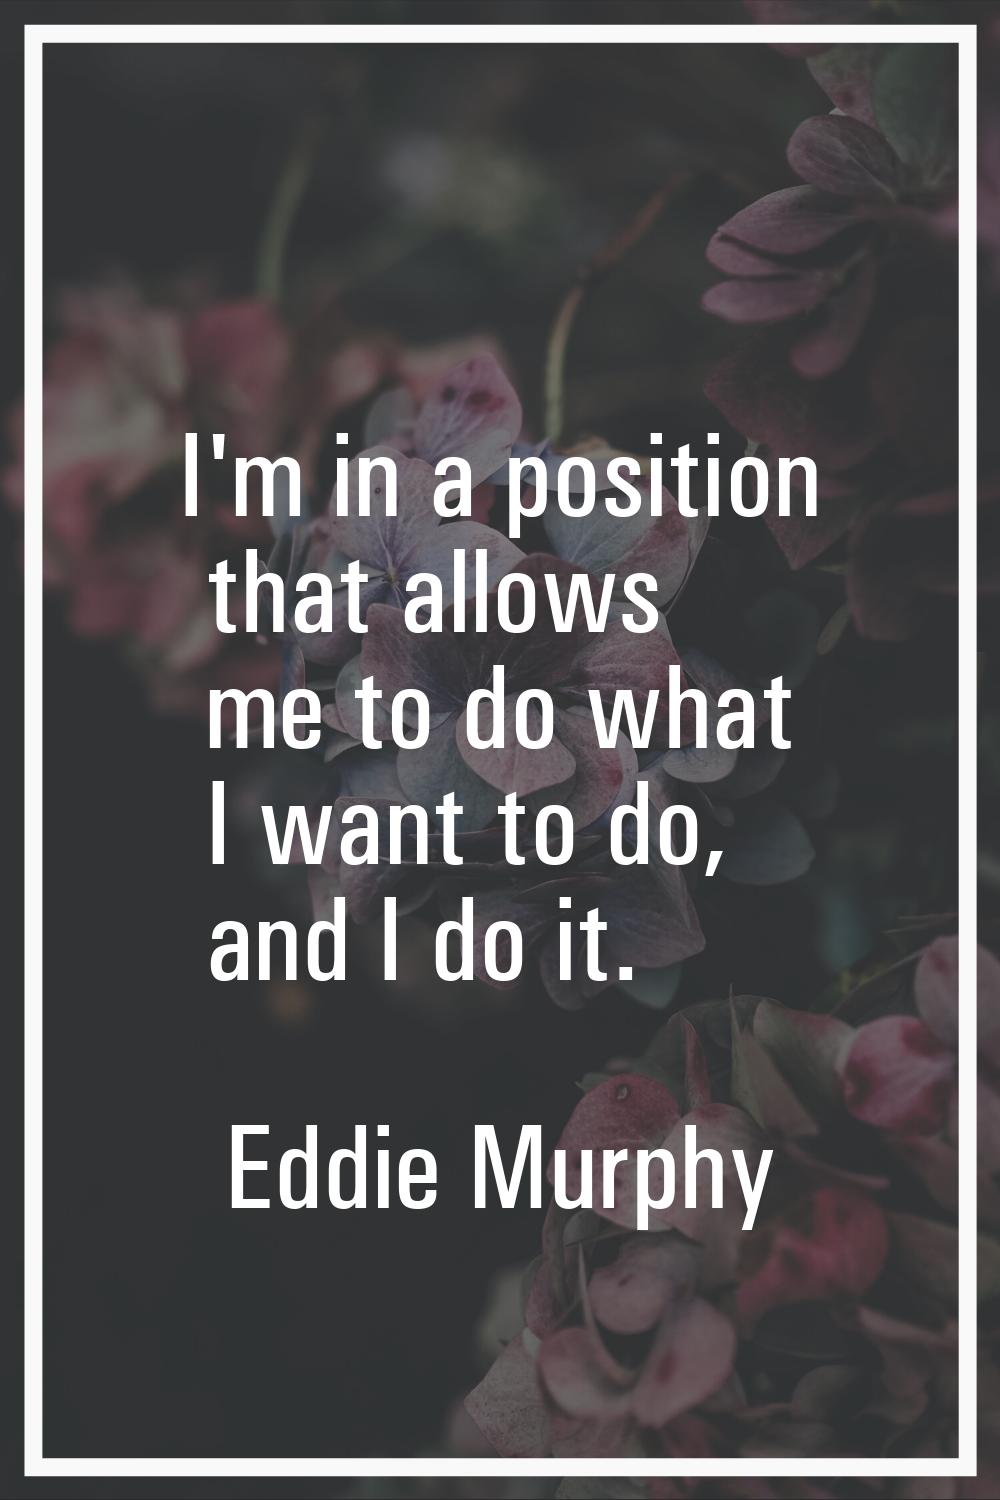 I'm in a position that allows me to do what I want to do, and I do it.